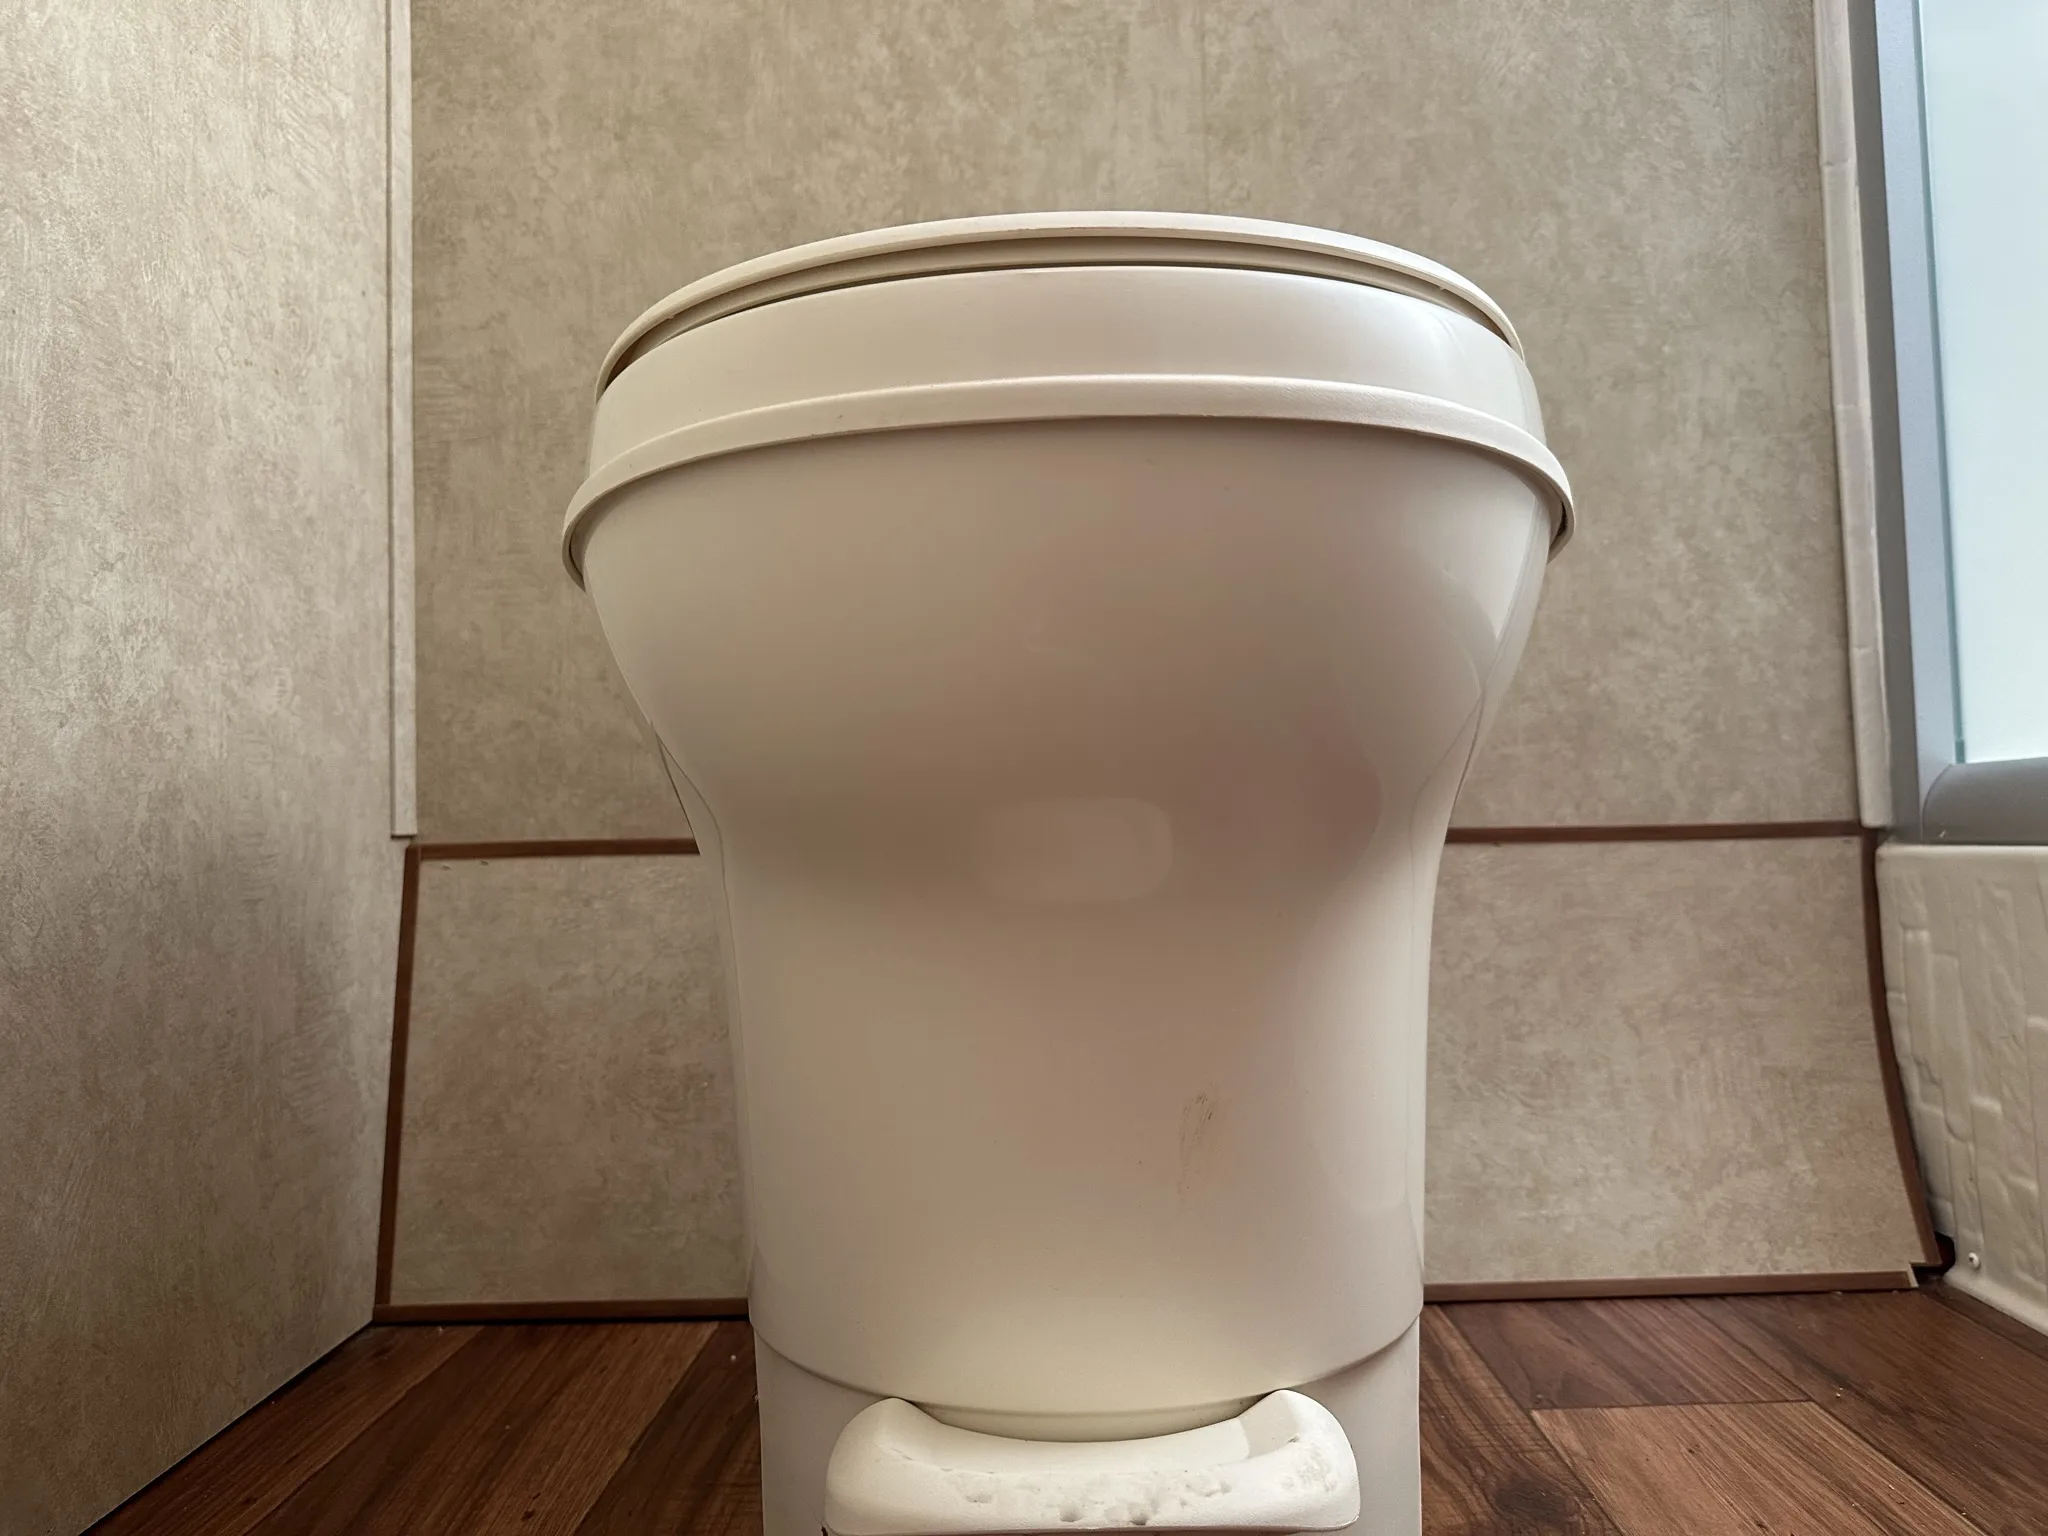 a white toilet sitting in a bathroom next to a toilet paper dispenser on a wooden floor, image for R